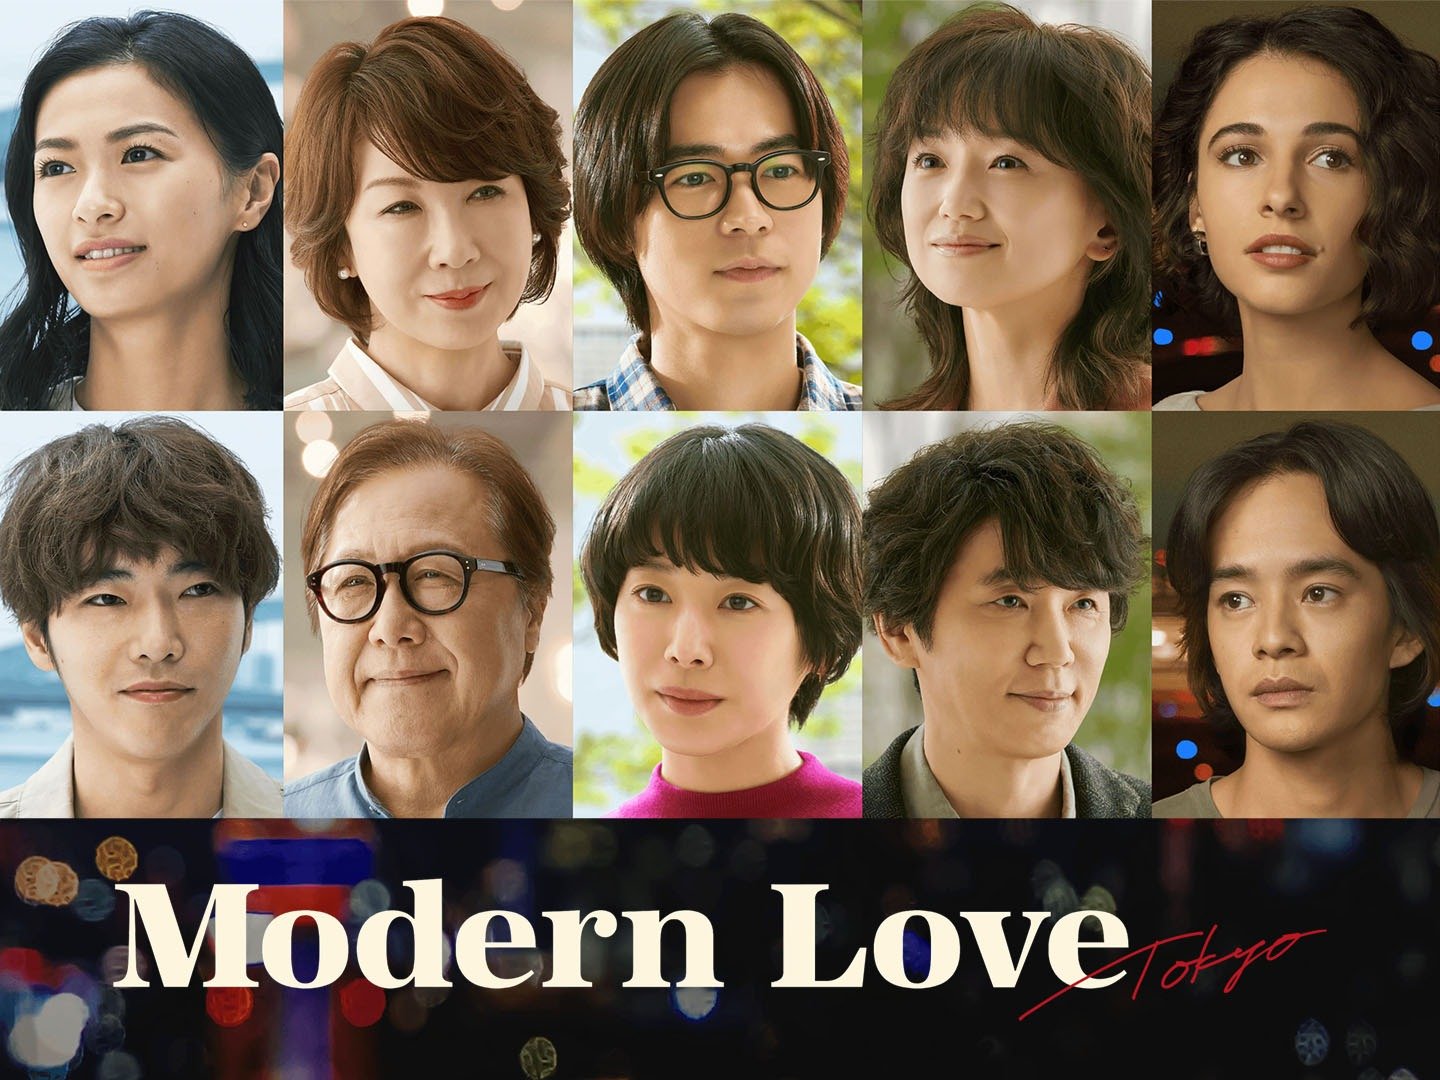 How to Watch Modern Love Tokyo on Prime Video